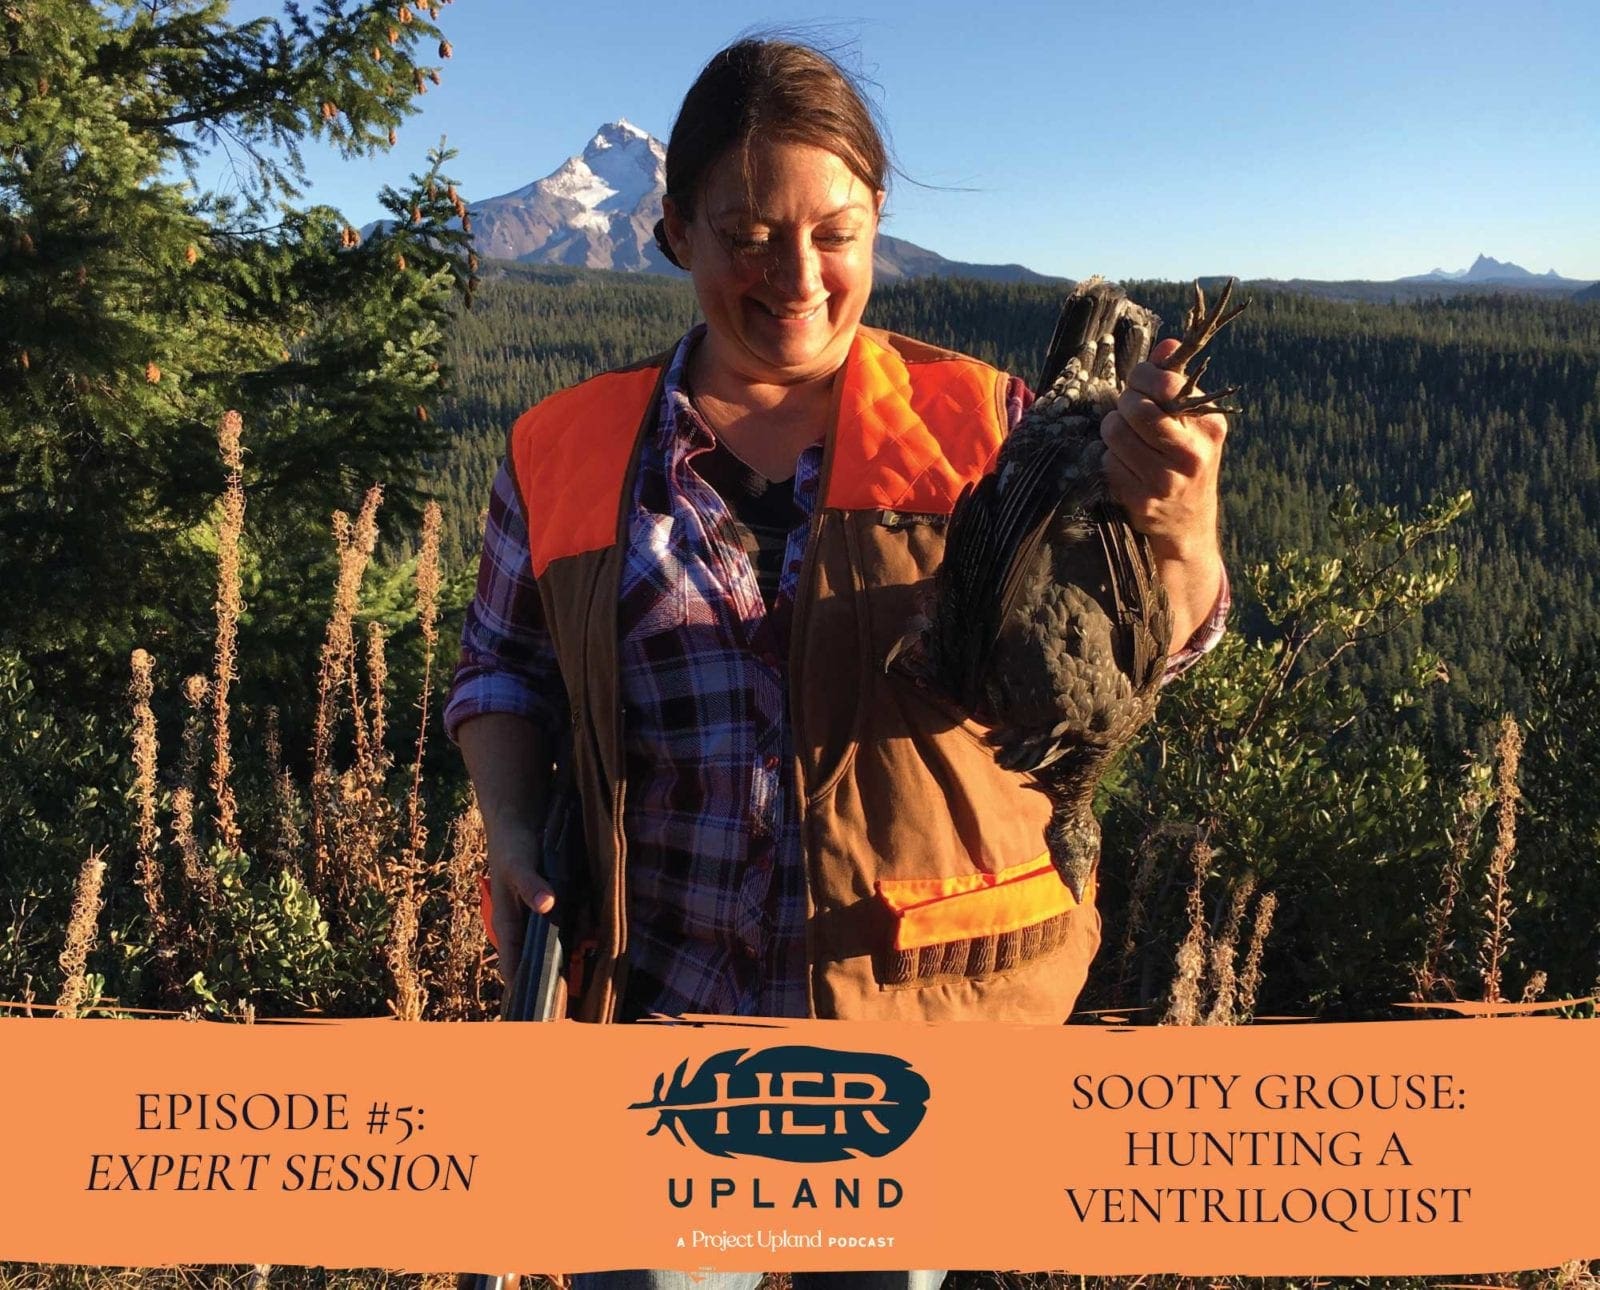 A woman hunter holds a sooty grouse